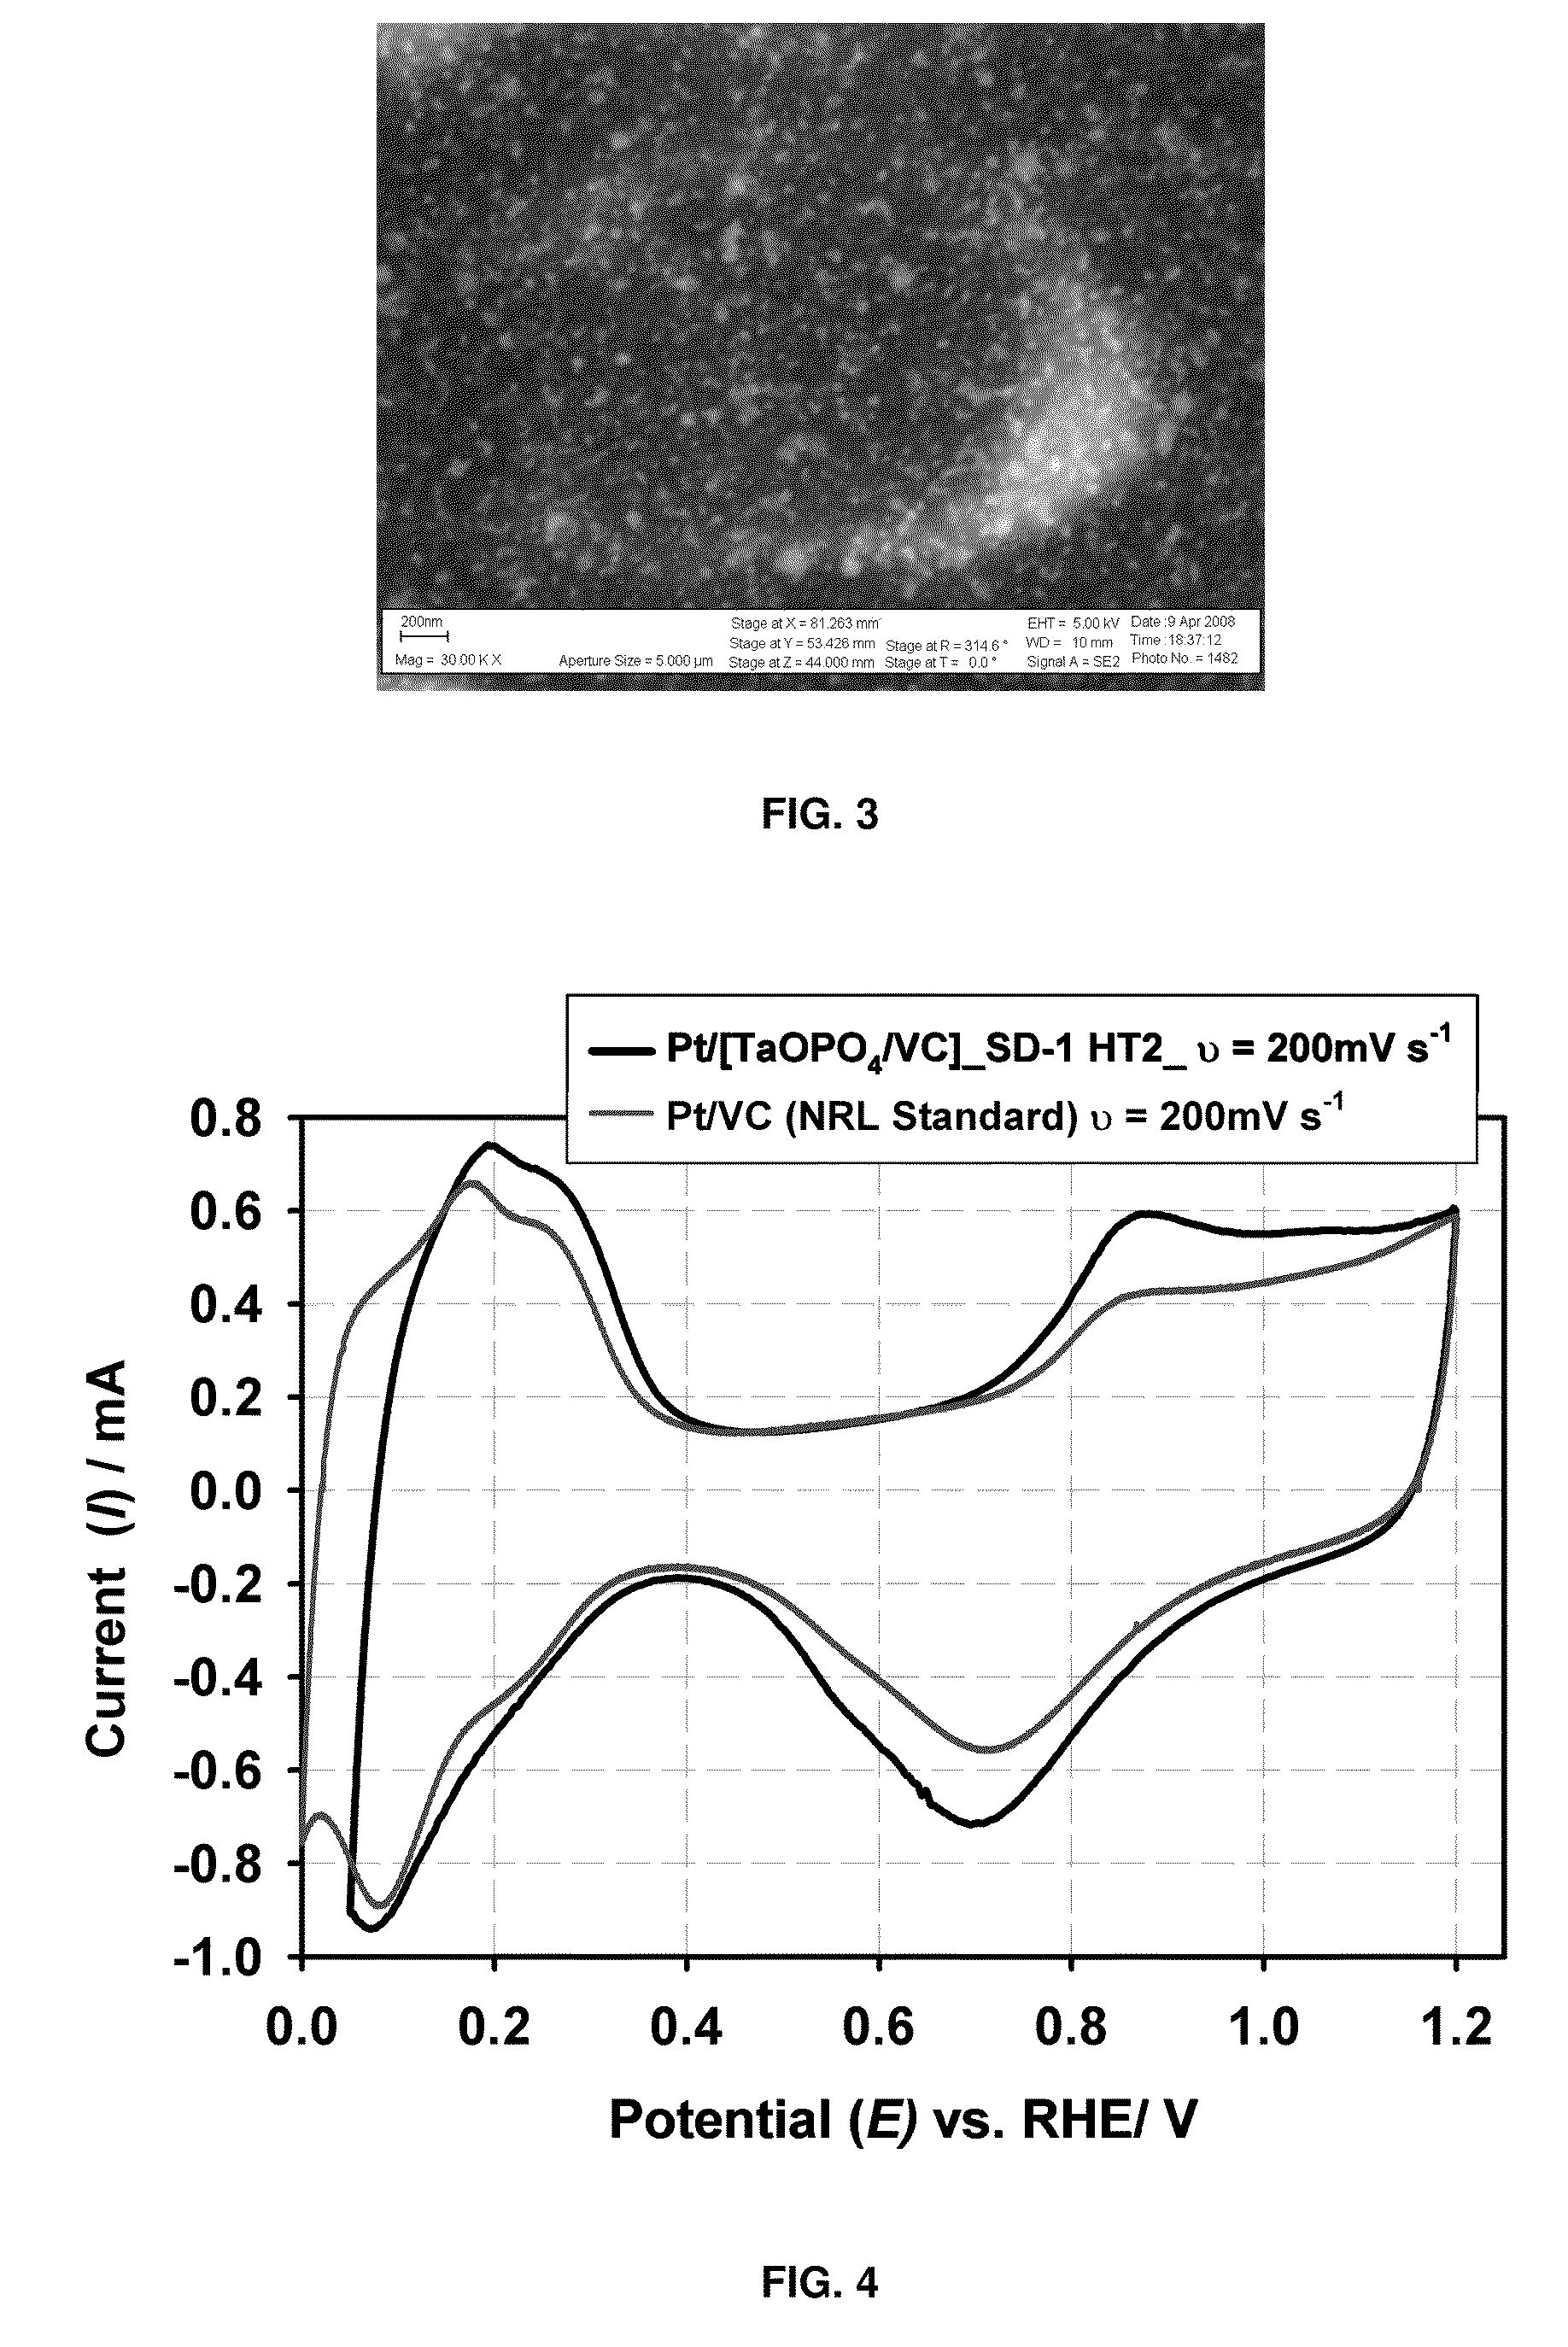 Nanocomposite catalyst materials comprising conductive support (carbon), transition metal compound, and metal nanoparticles